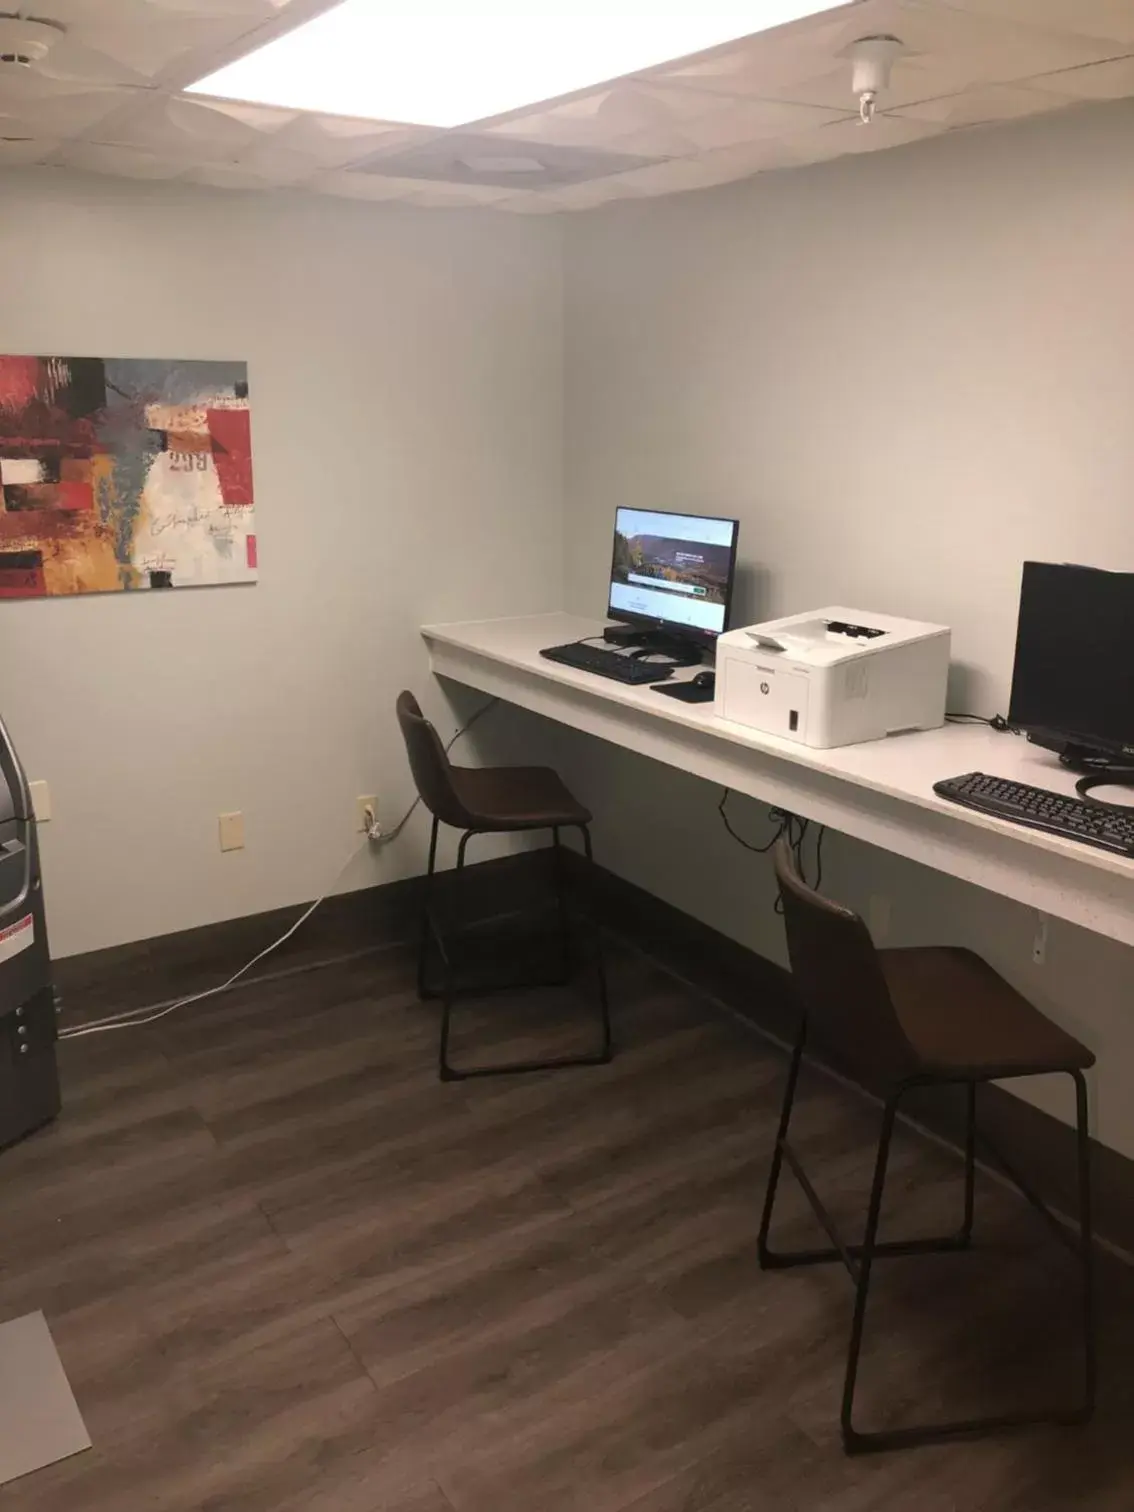 Business facilities in Wingate by Wyndham Humble/Houston Intercontinental Airport